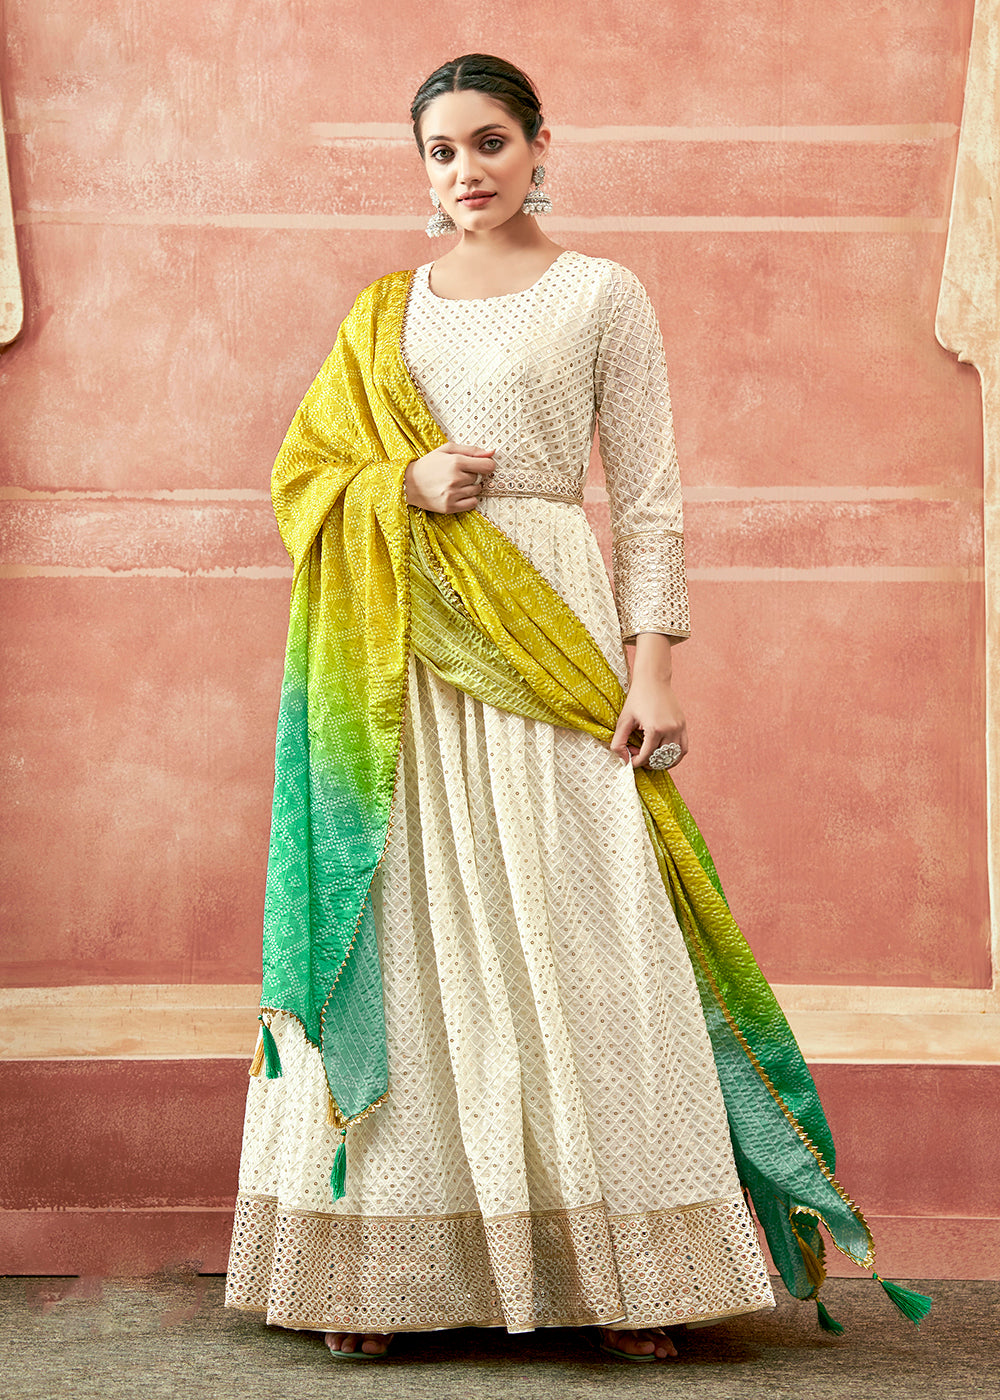 Buy Now Daisy White Traditional Anarkali with Yellow Ombre Bandhni Dupatta Online in USA, UK, Australia, New Zealand, Canada & Worldwide at Empress Clothing.